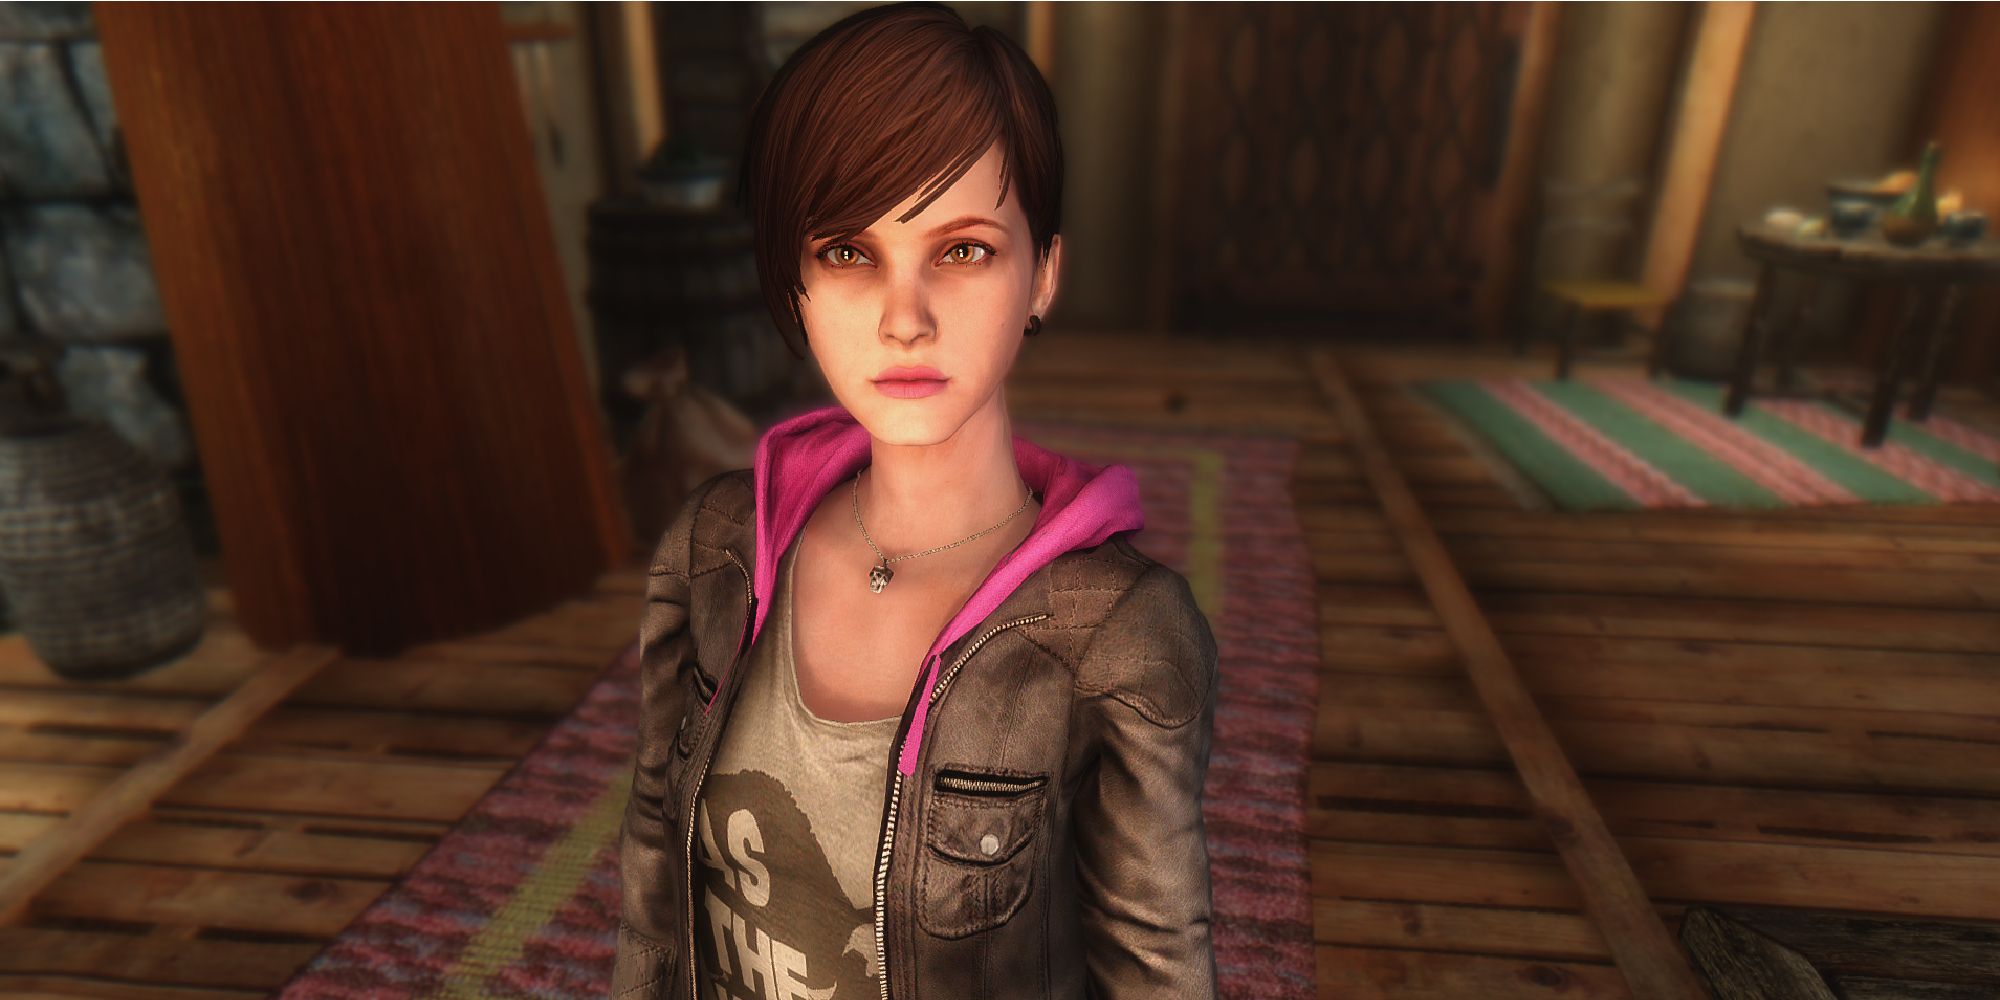 Moira stands in a neutral pose in a well-lit room, facing the camera with a neutral expression.